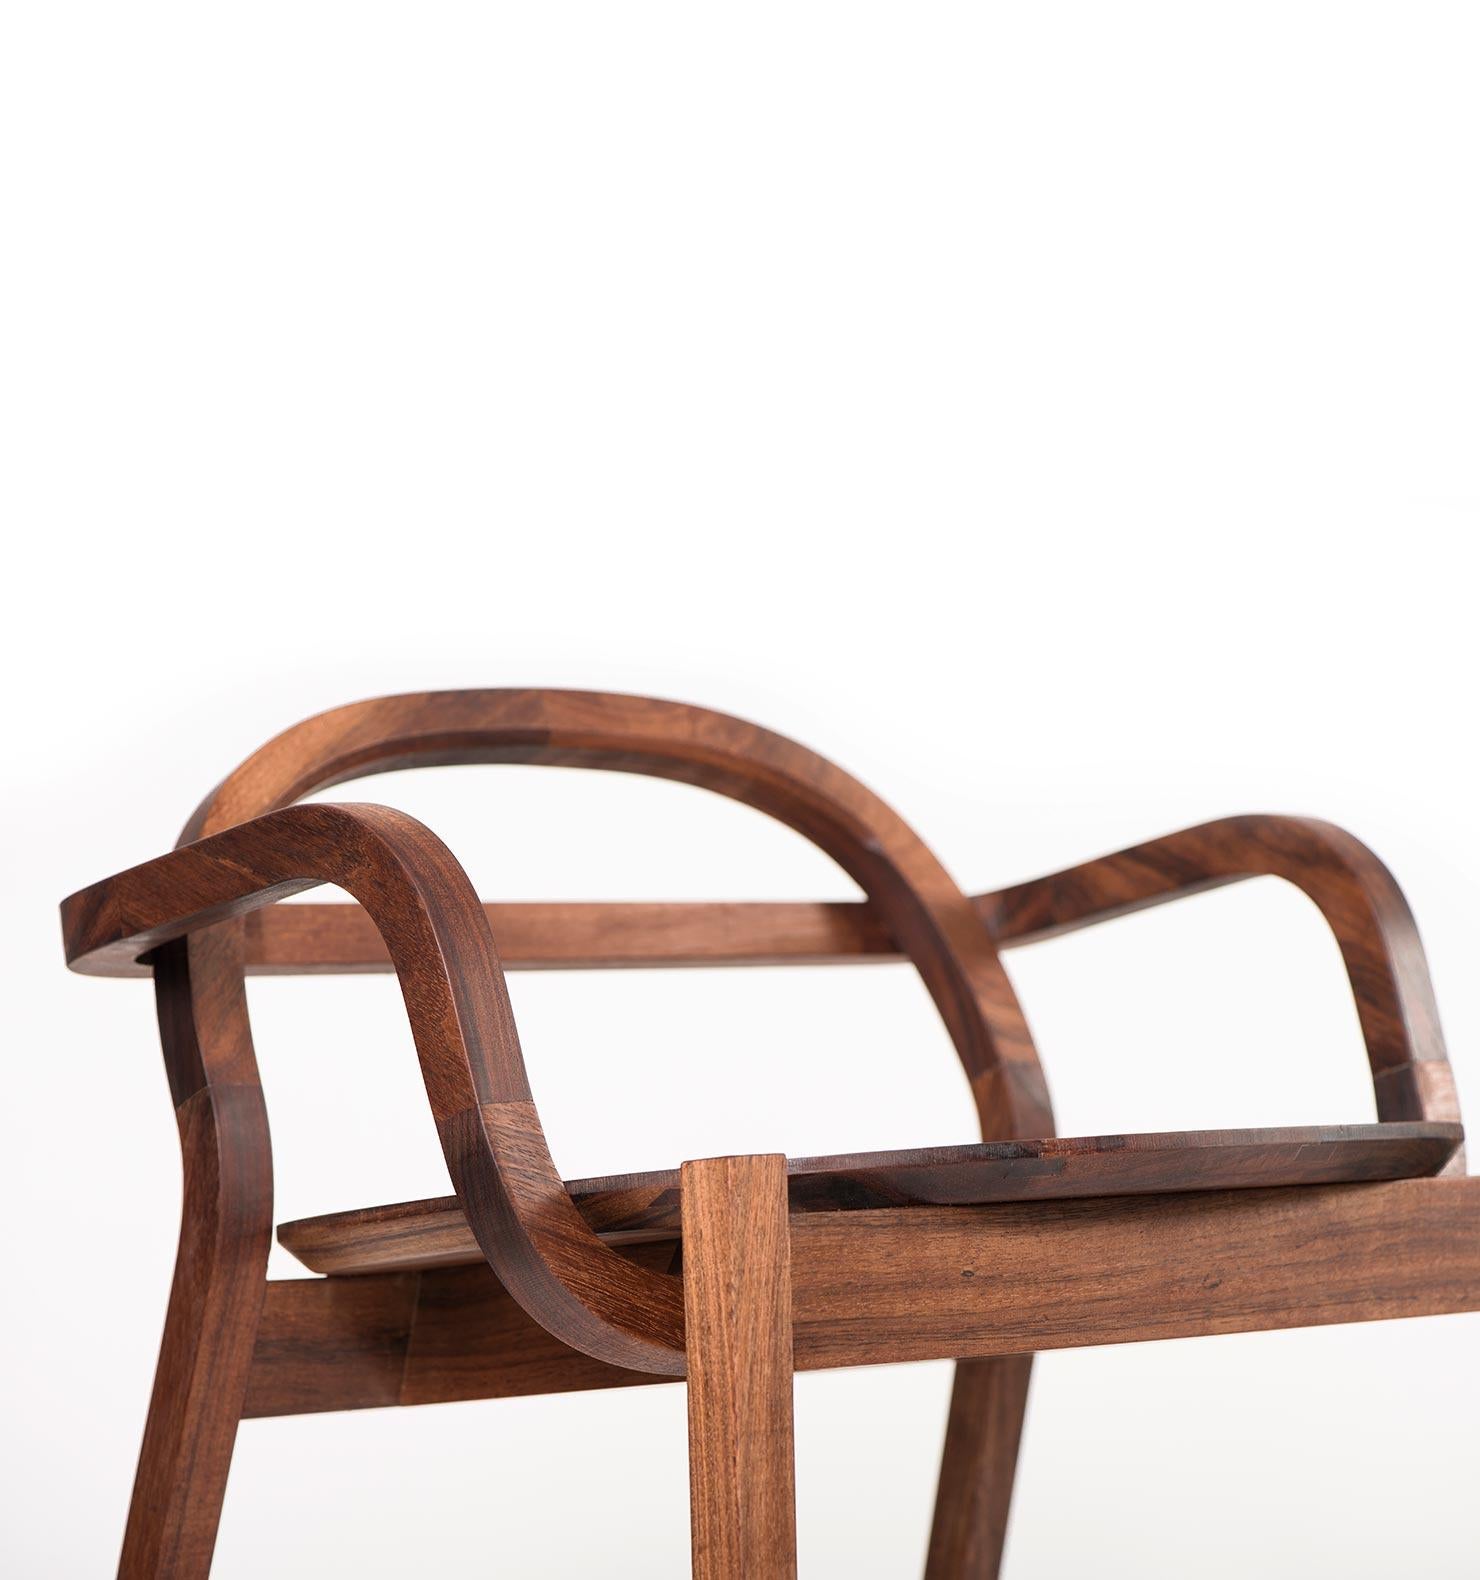 Hand-Crafted TONO Cs Chair, Mexican contemporary Accent Chair by Emiliano Molina for CUCHARA For Sale